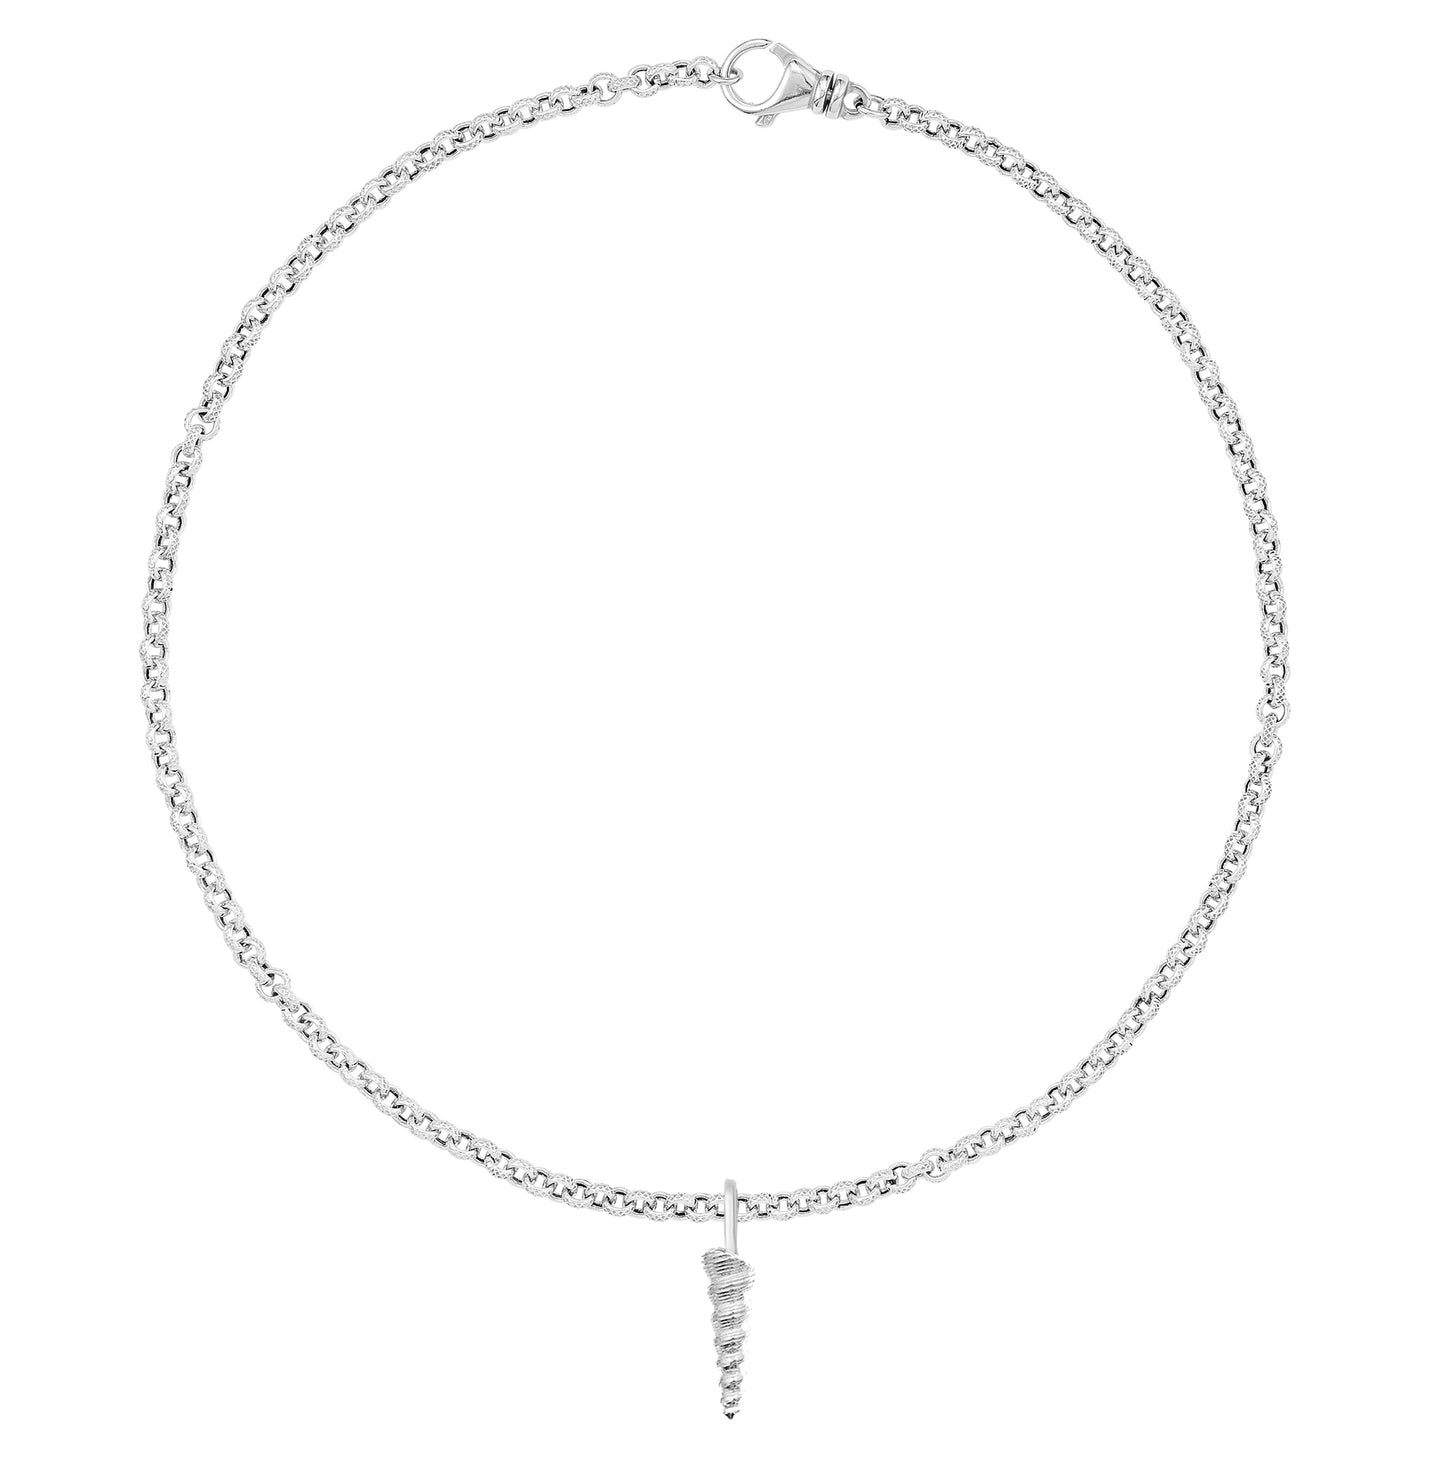 Haket Auger Silver Necklace